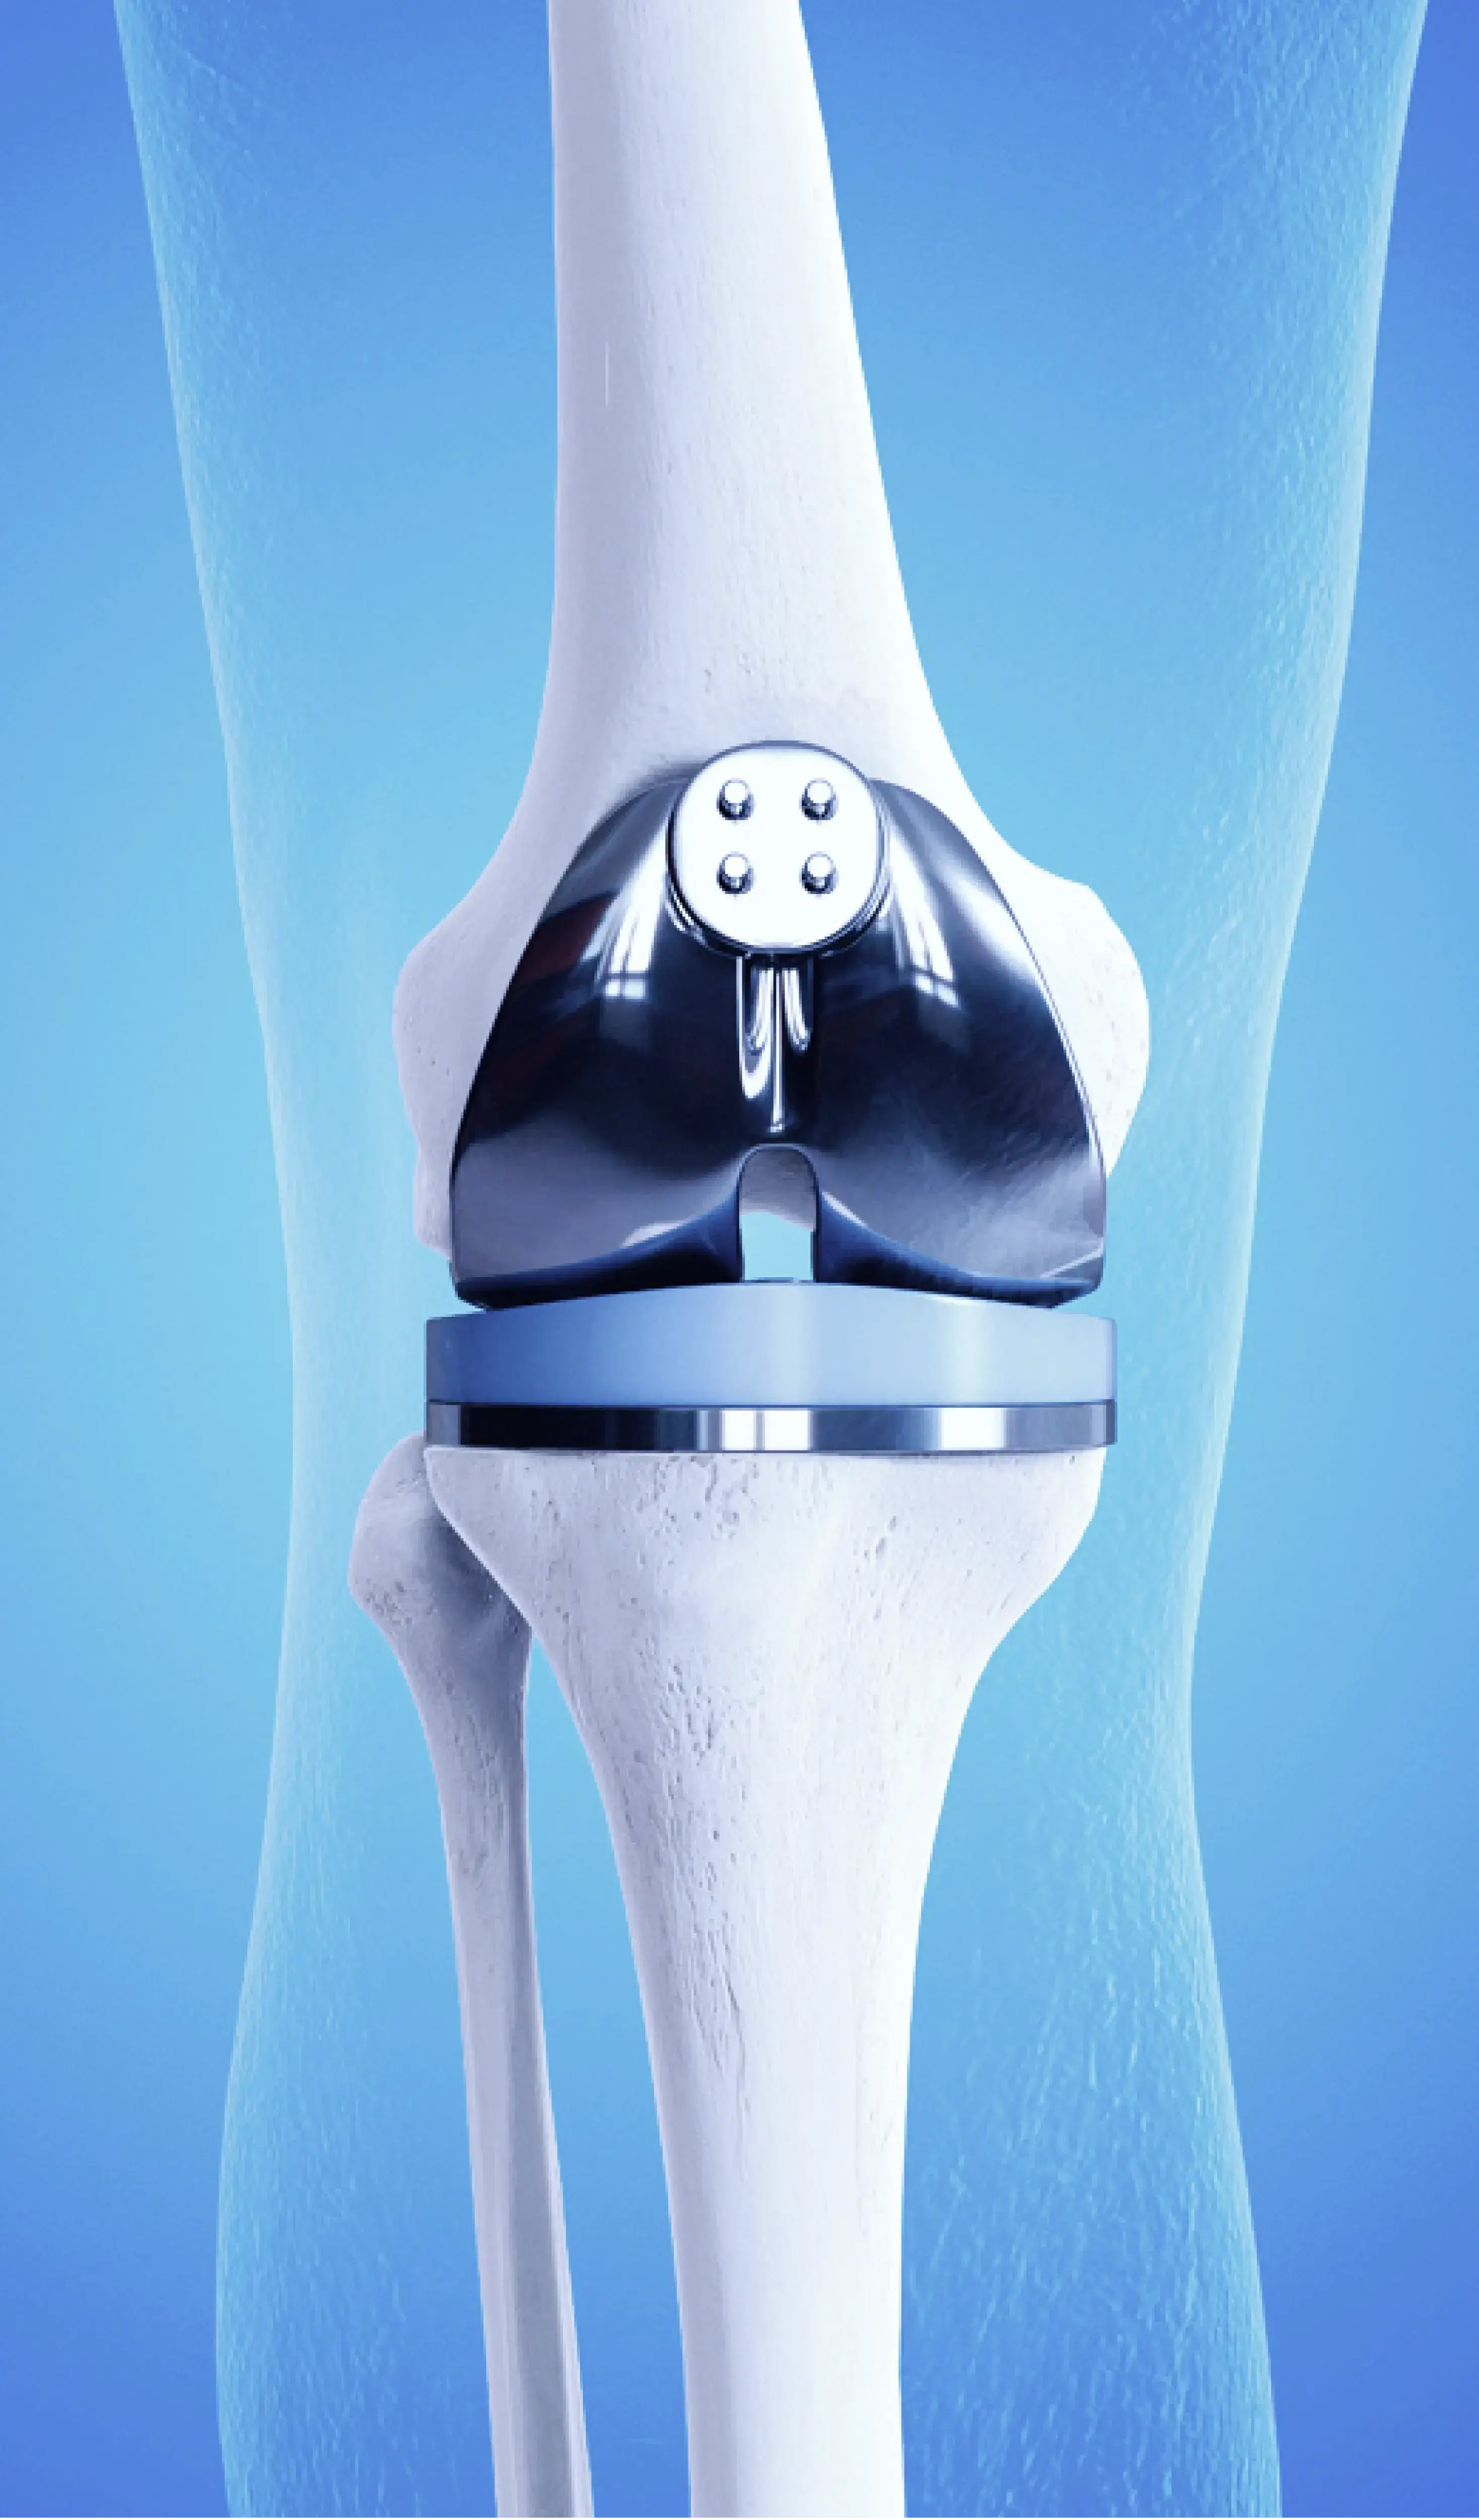 knee replacement prostheses